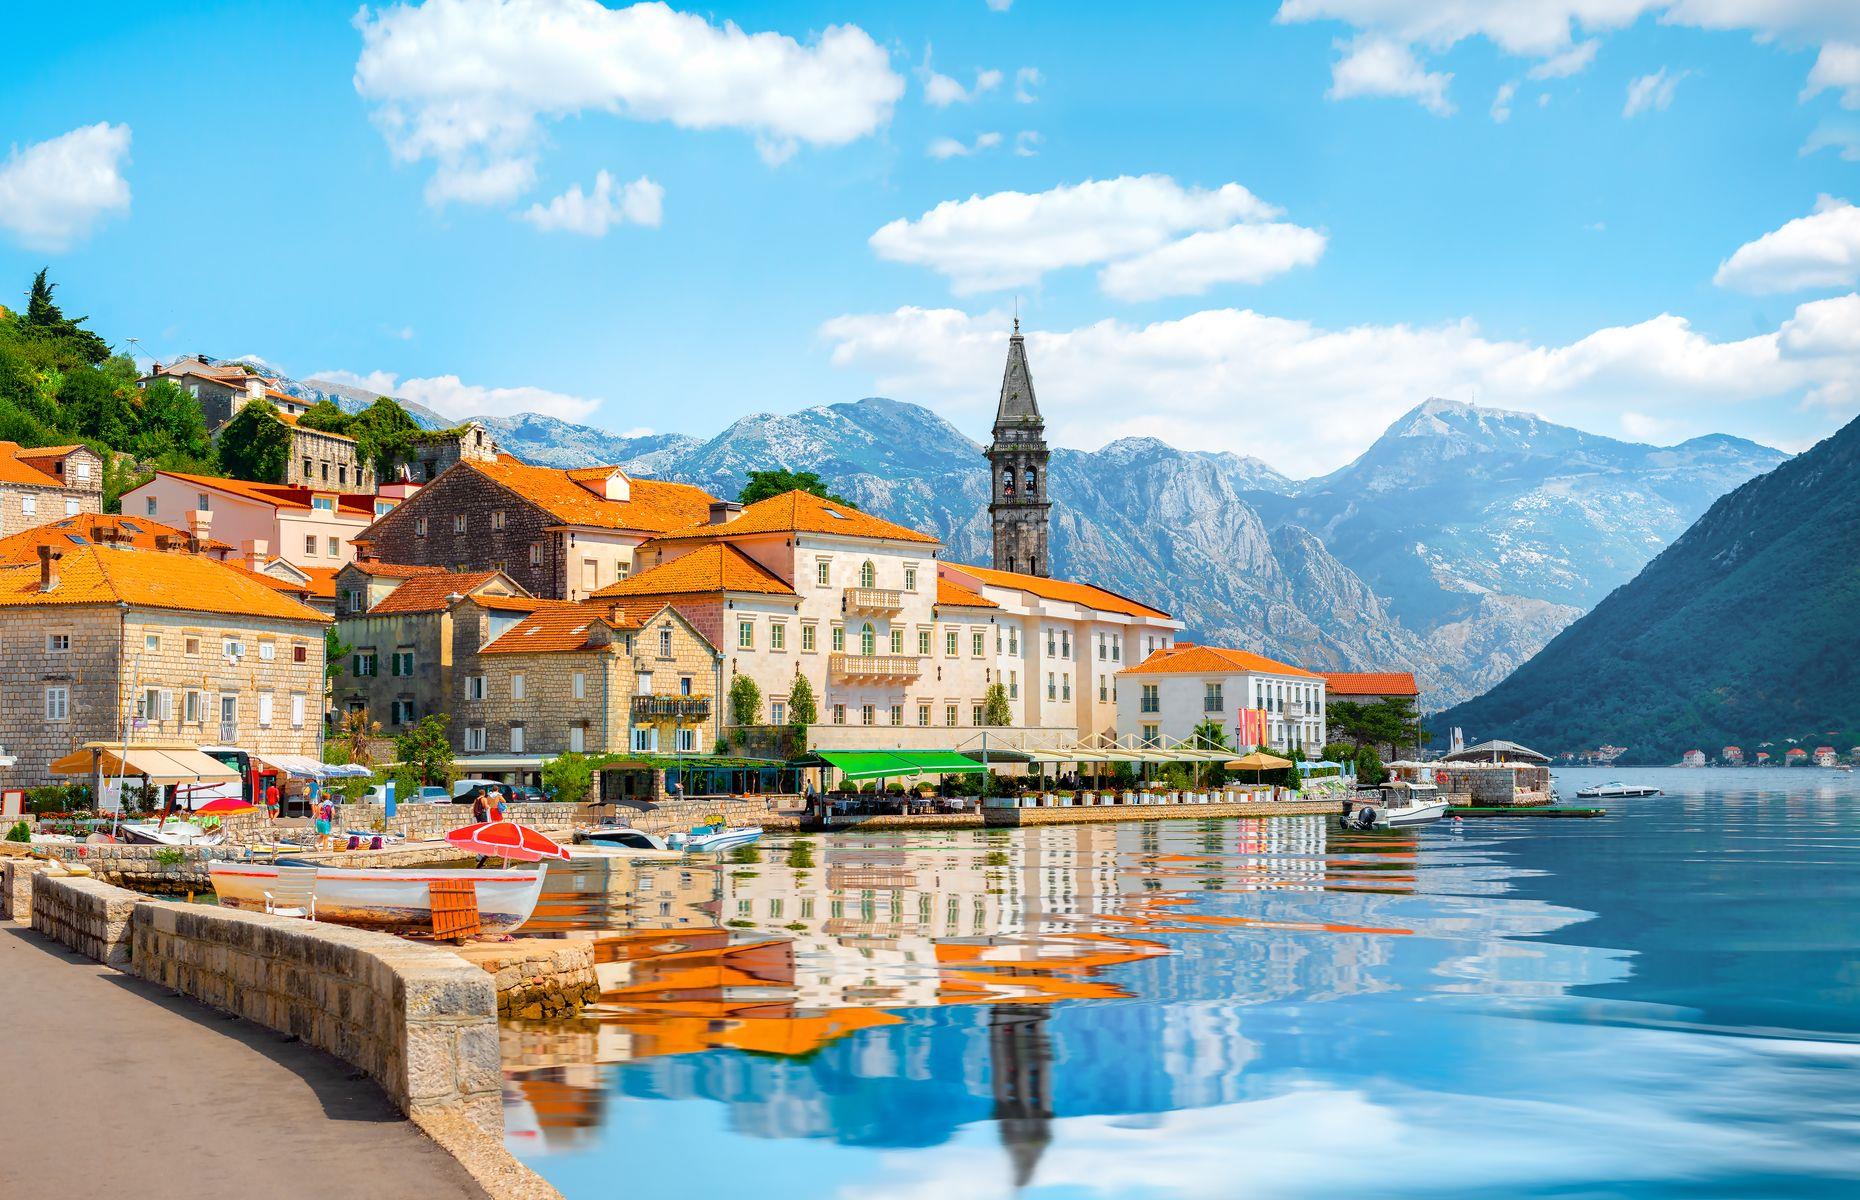 <p>Perast is a tranquil town in Montenegro’s <a href="https://www.loveexploring.com/news/93422/weekend-break-kotor-montenegro-europe-2020-holidays">Kotor</a> Bay. Met by mirror-like waters that perfectly reflect its terracotta-roofed houses, the town looks as pretty as a picture. Don’t be fooled by its small size – it has a whopping 16 churches, which includes the unfinished Church of St. Nicholas. The spire of the 17th-century church rises in the background of this enchanting photo.</p>